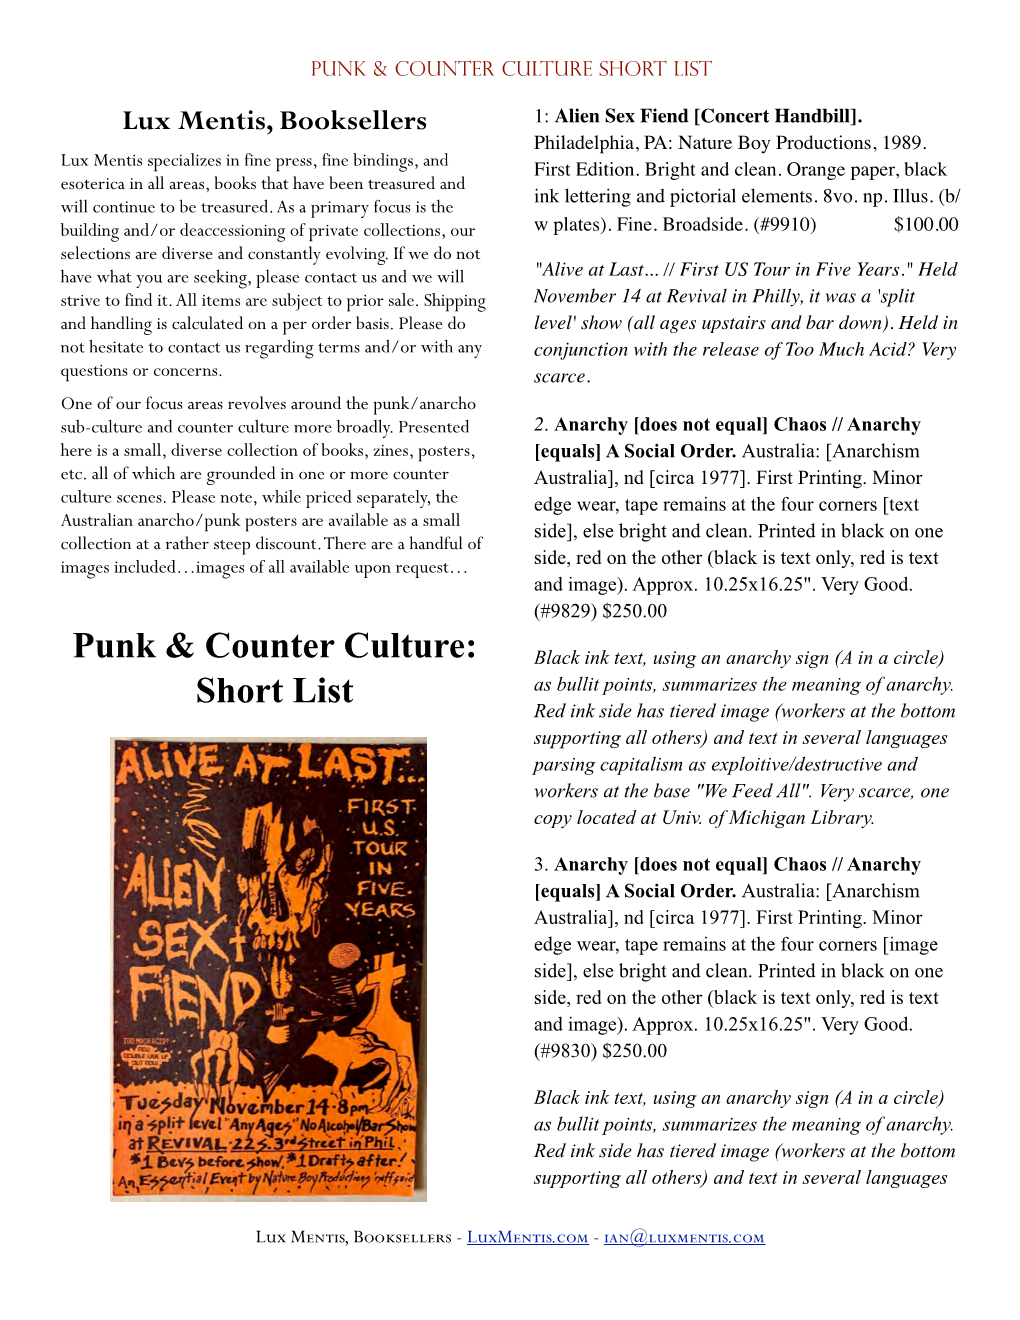 Punk and Counter Culture List